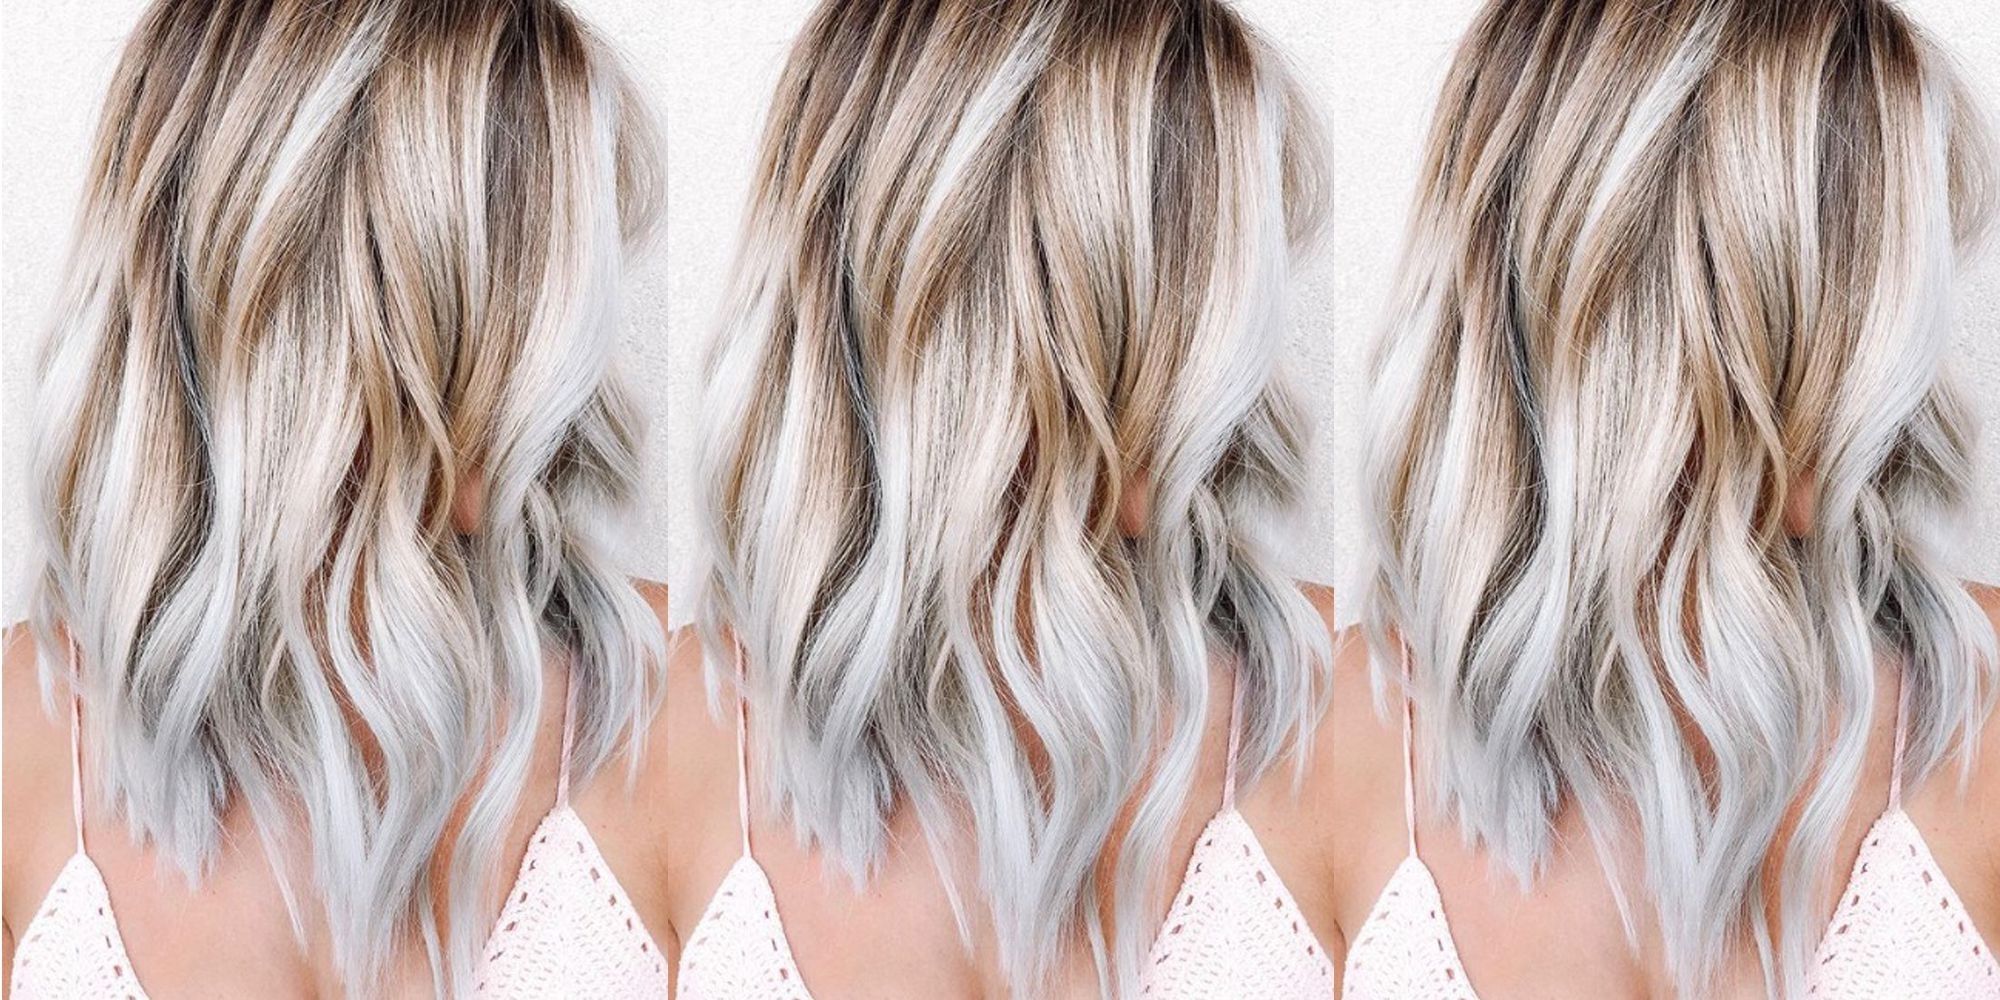 7 Blonde Hair Trends For Summer 2018 – New Ways To Try Blonde Hair With Well Liked Creamy Blonde Fade Hairstyles (Gallery 16 of 20)